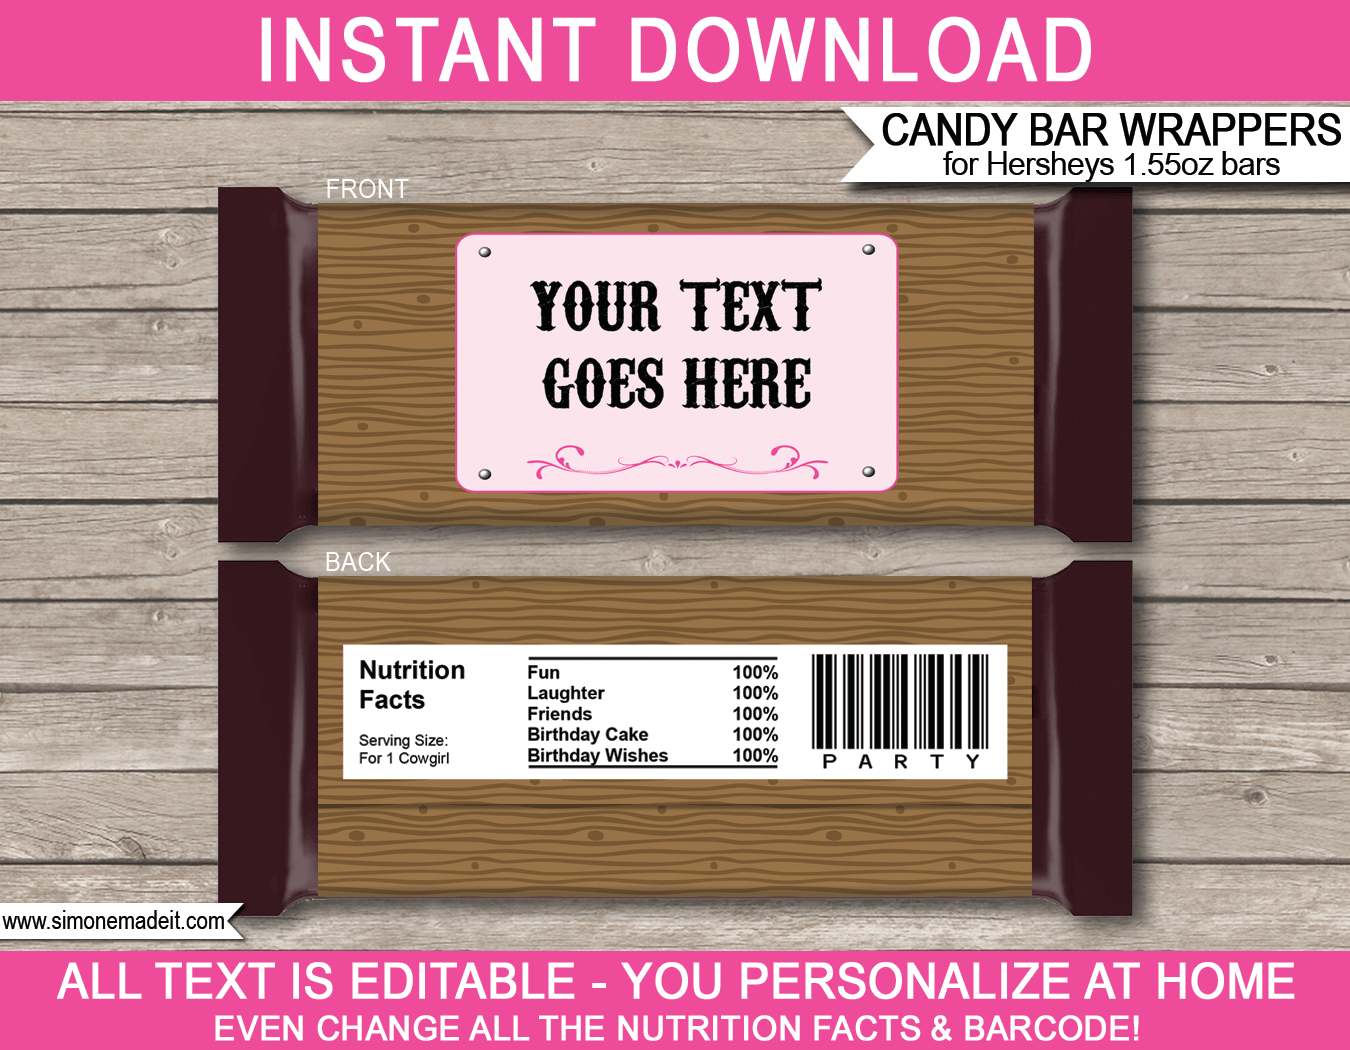 Cowgirl Hershey Candy Bar Wrappers | Birthday Party Favors | Personalized Candy Bars | Editable Template | INSTANT DOWNLOAD $3.00 via simonemadeit.com